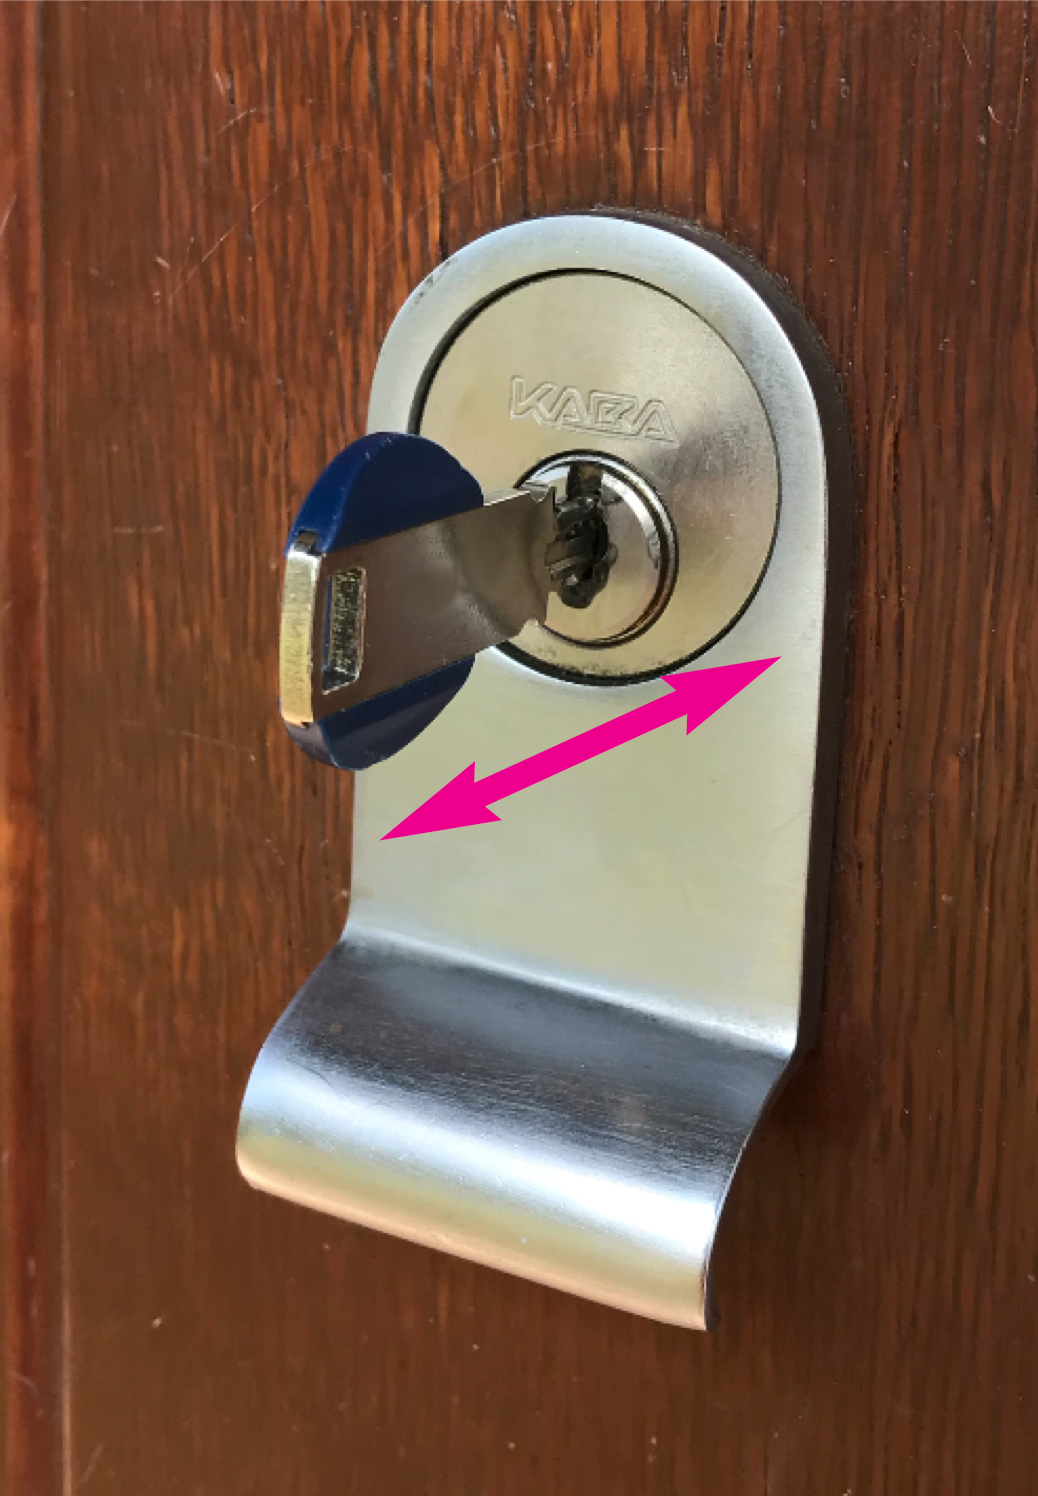 Move key in and out of lock